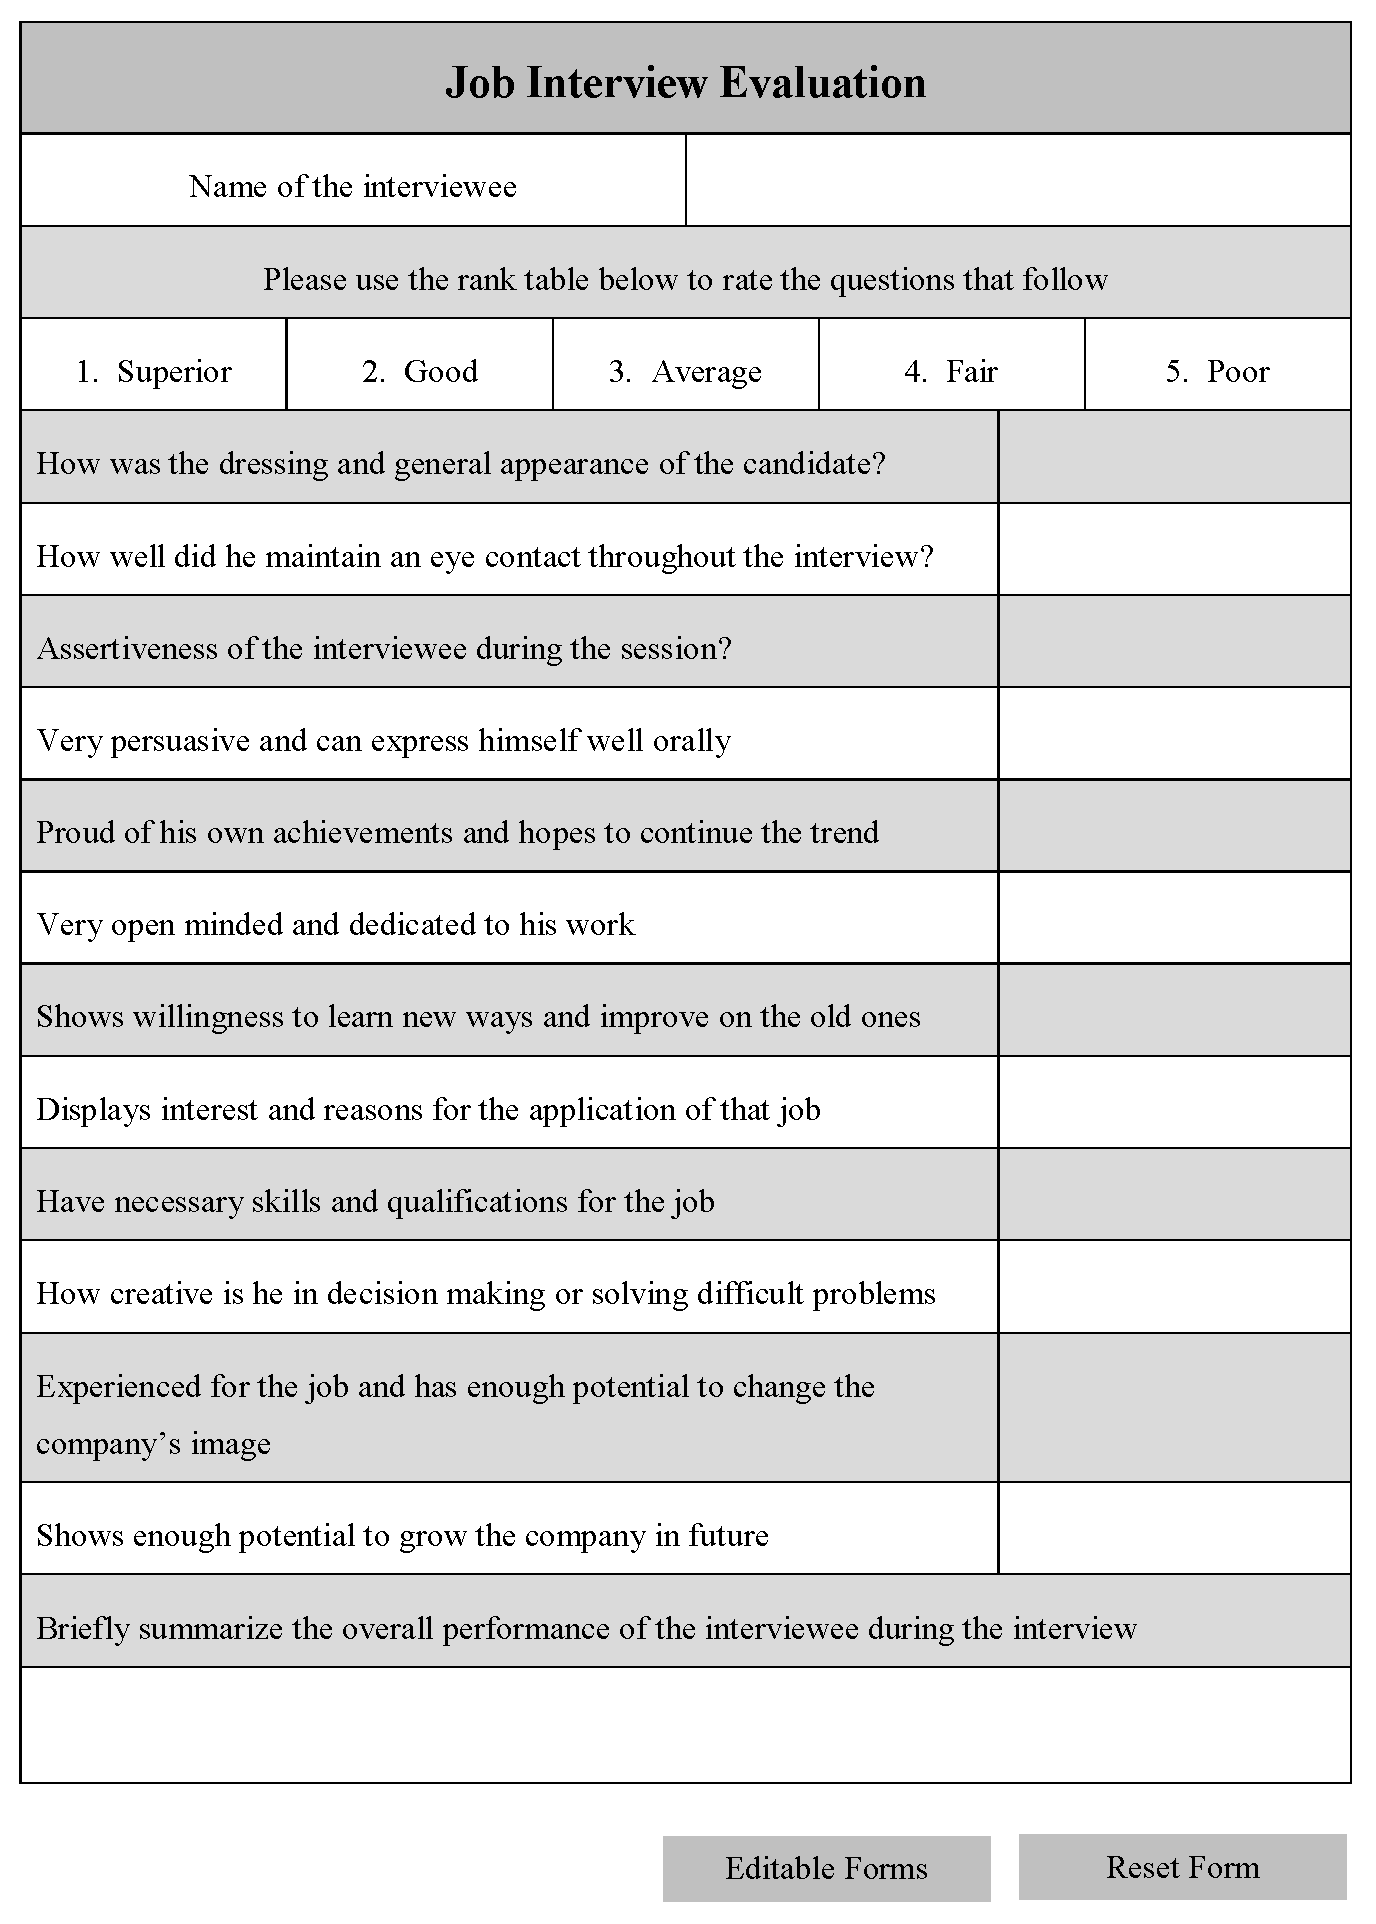 Interview Evaluation Form Template